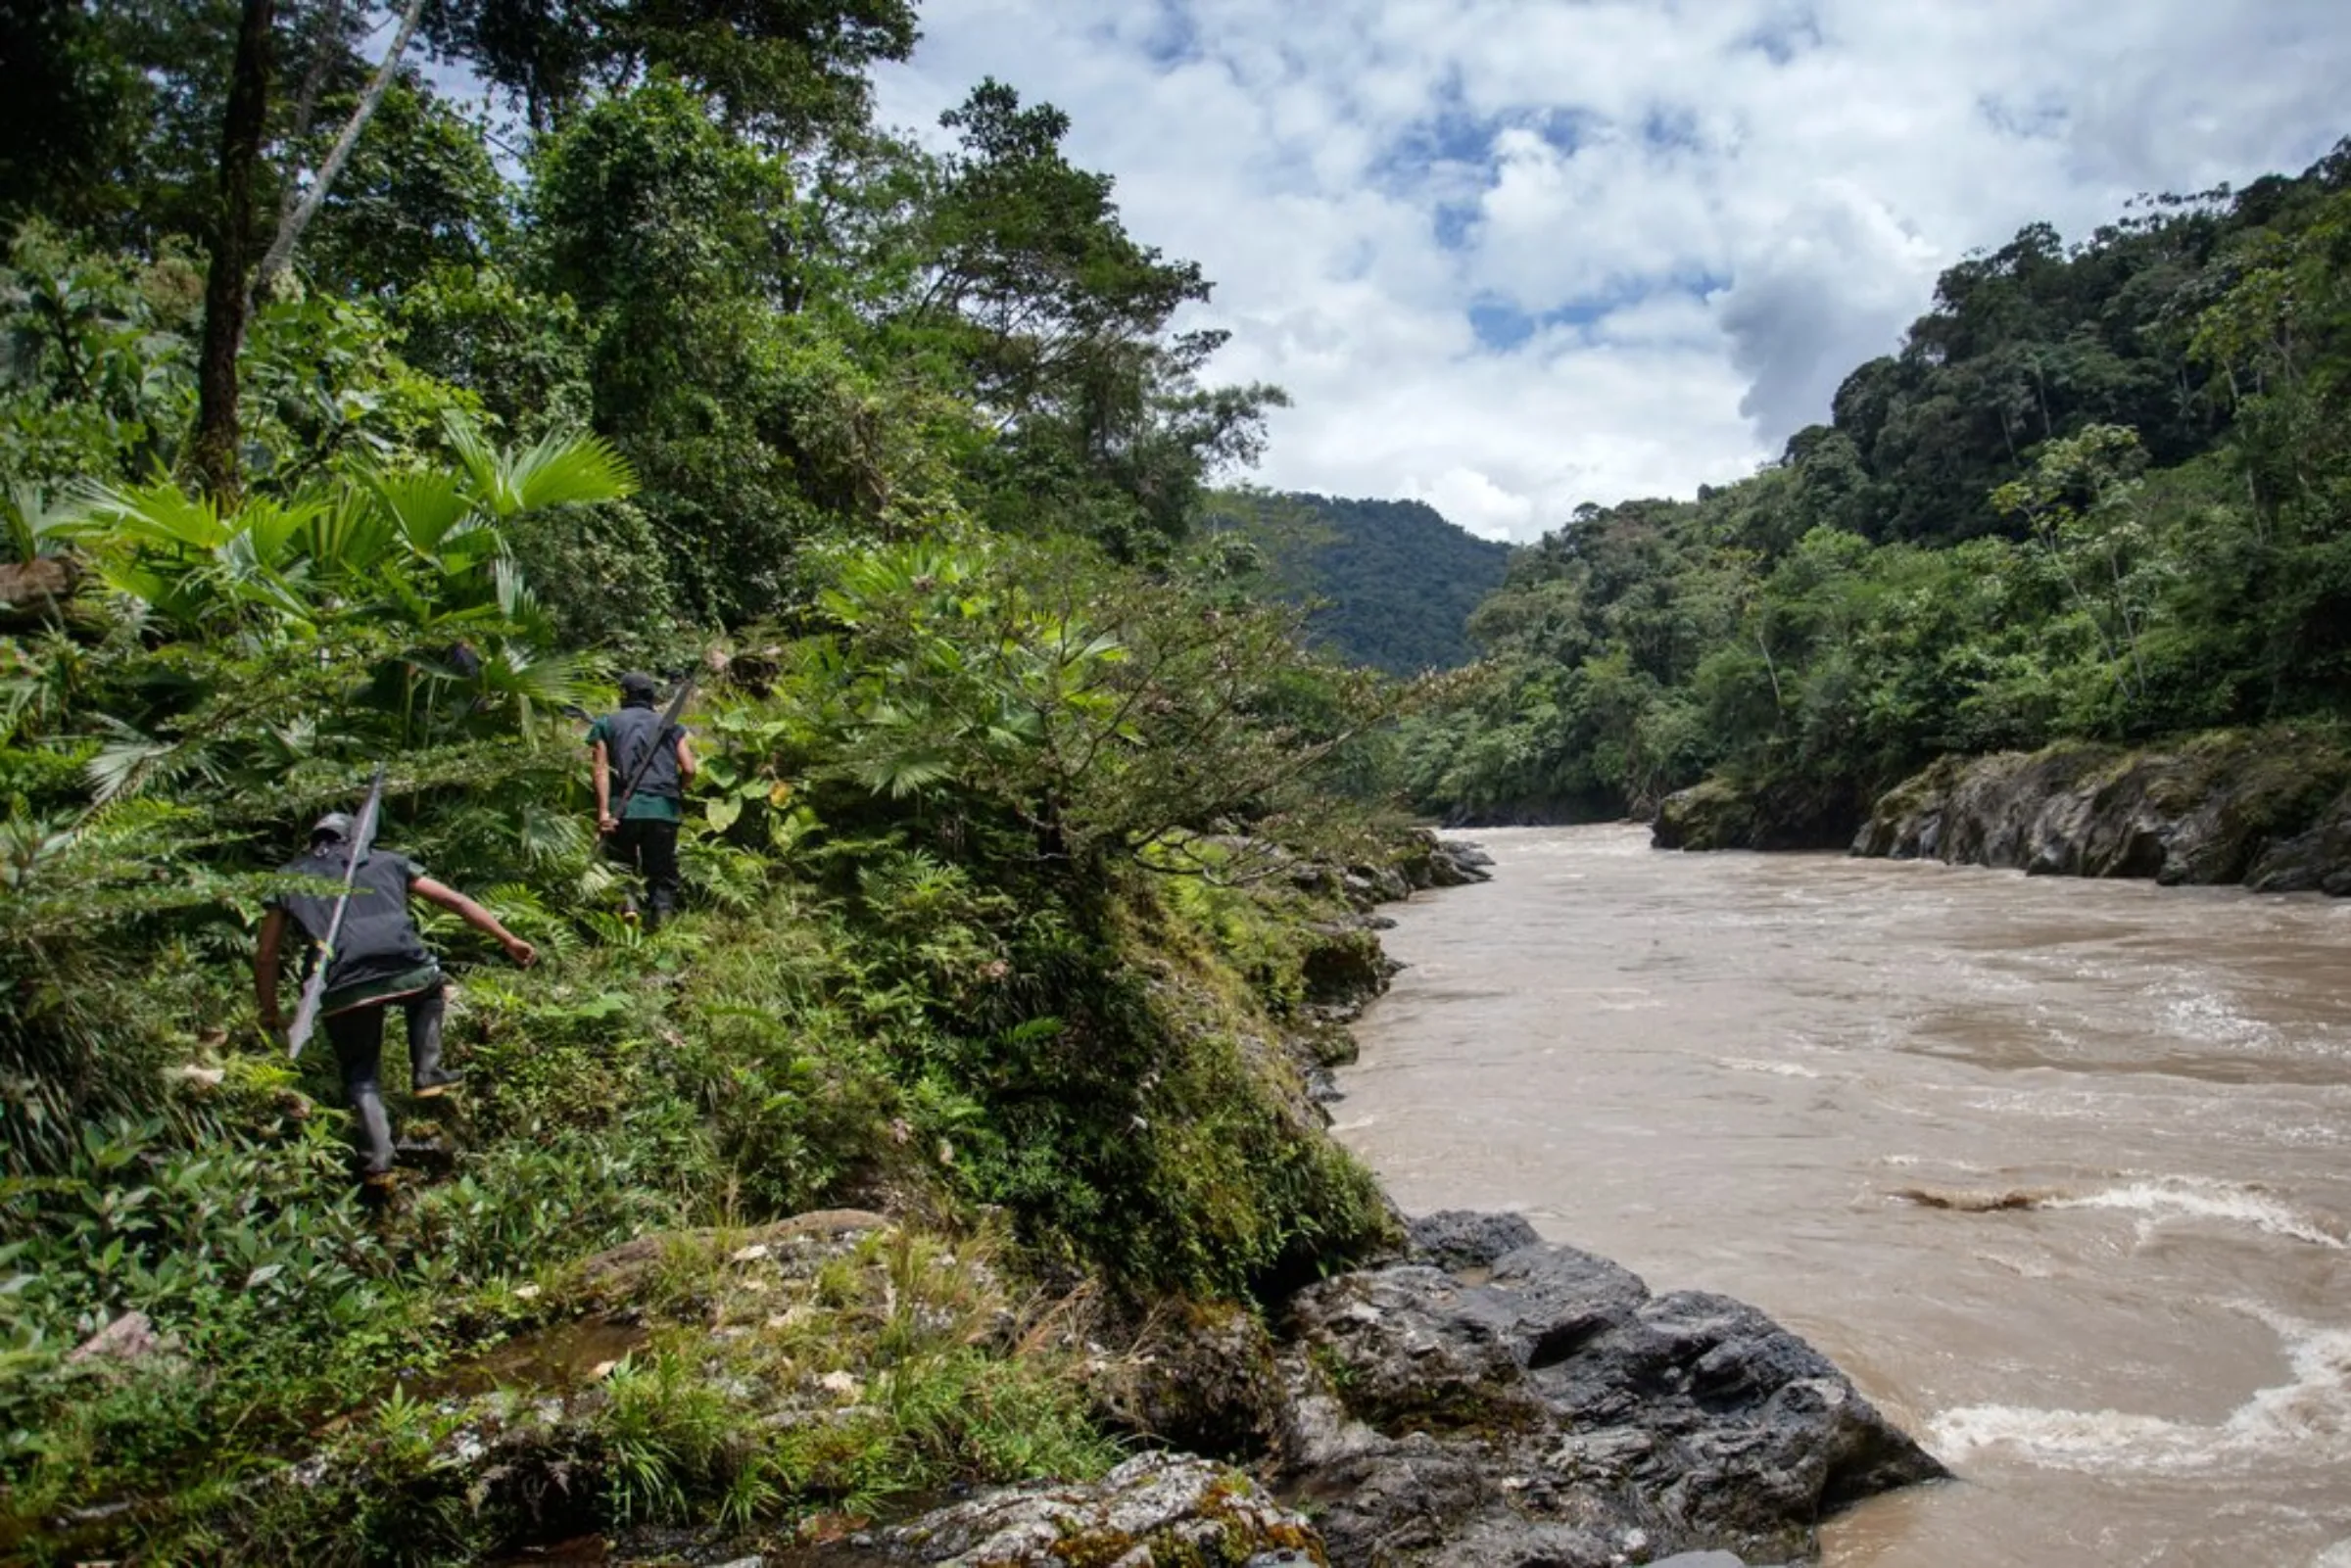 Members of the Cofan indigenous guard patrol the banks of the Aguarico River near their rainforest village of Sinangoe in northern Ecuador, on April 21, 2022. Patrols can take up to two weeks and are carried out regularly